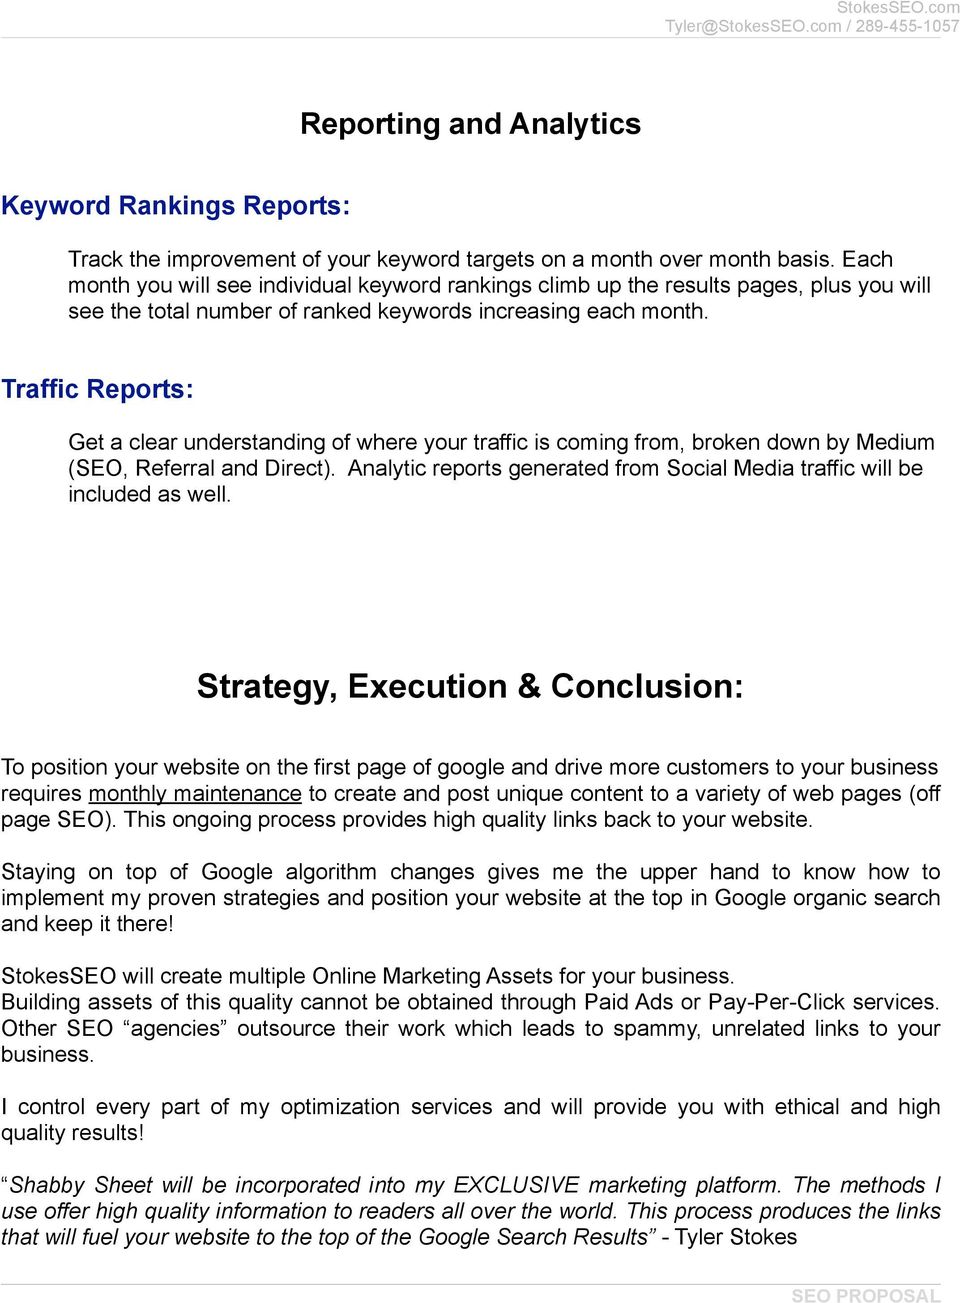 Traffic Reports: Get a clear understanding of where your traffic is coming from, broken down by Medium (SEO, Referral and Direct).